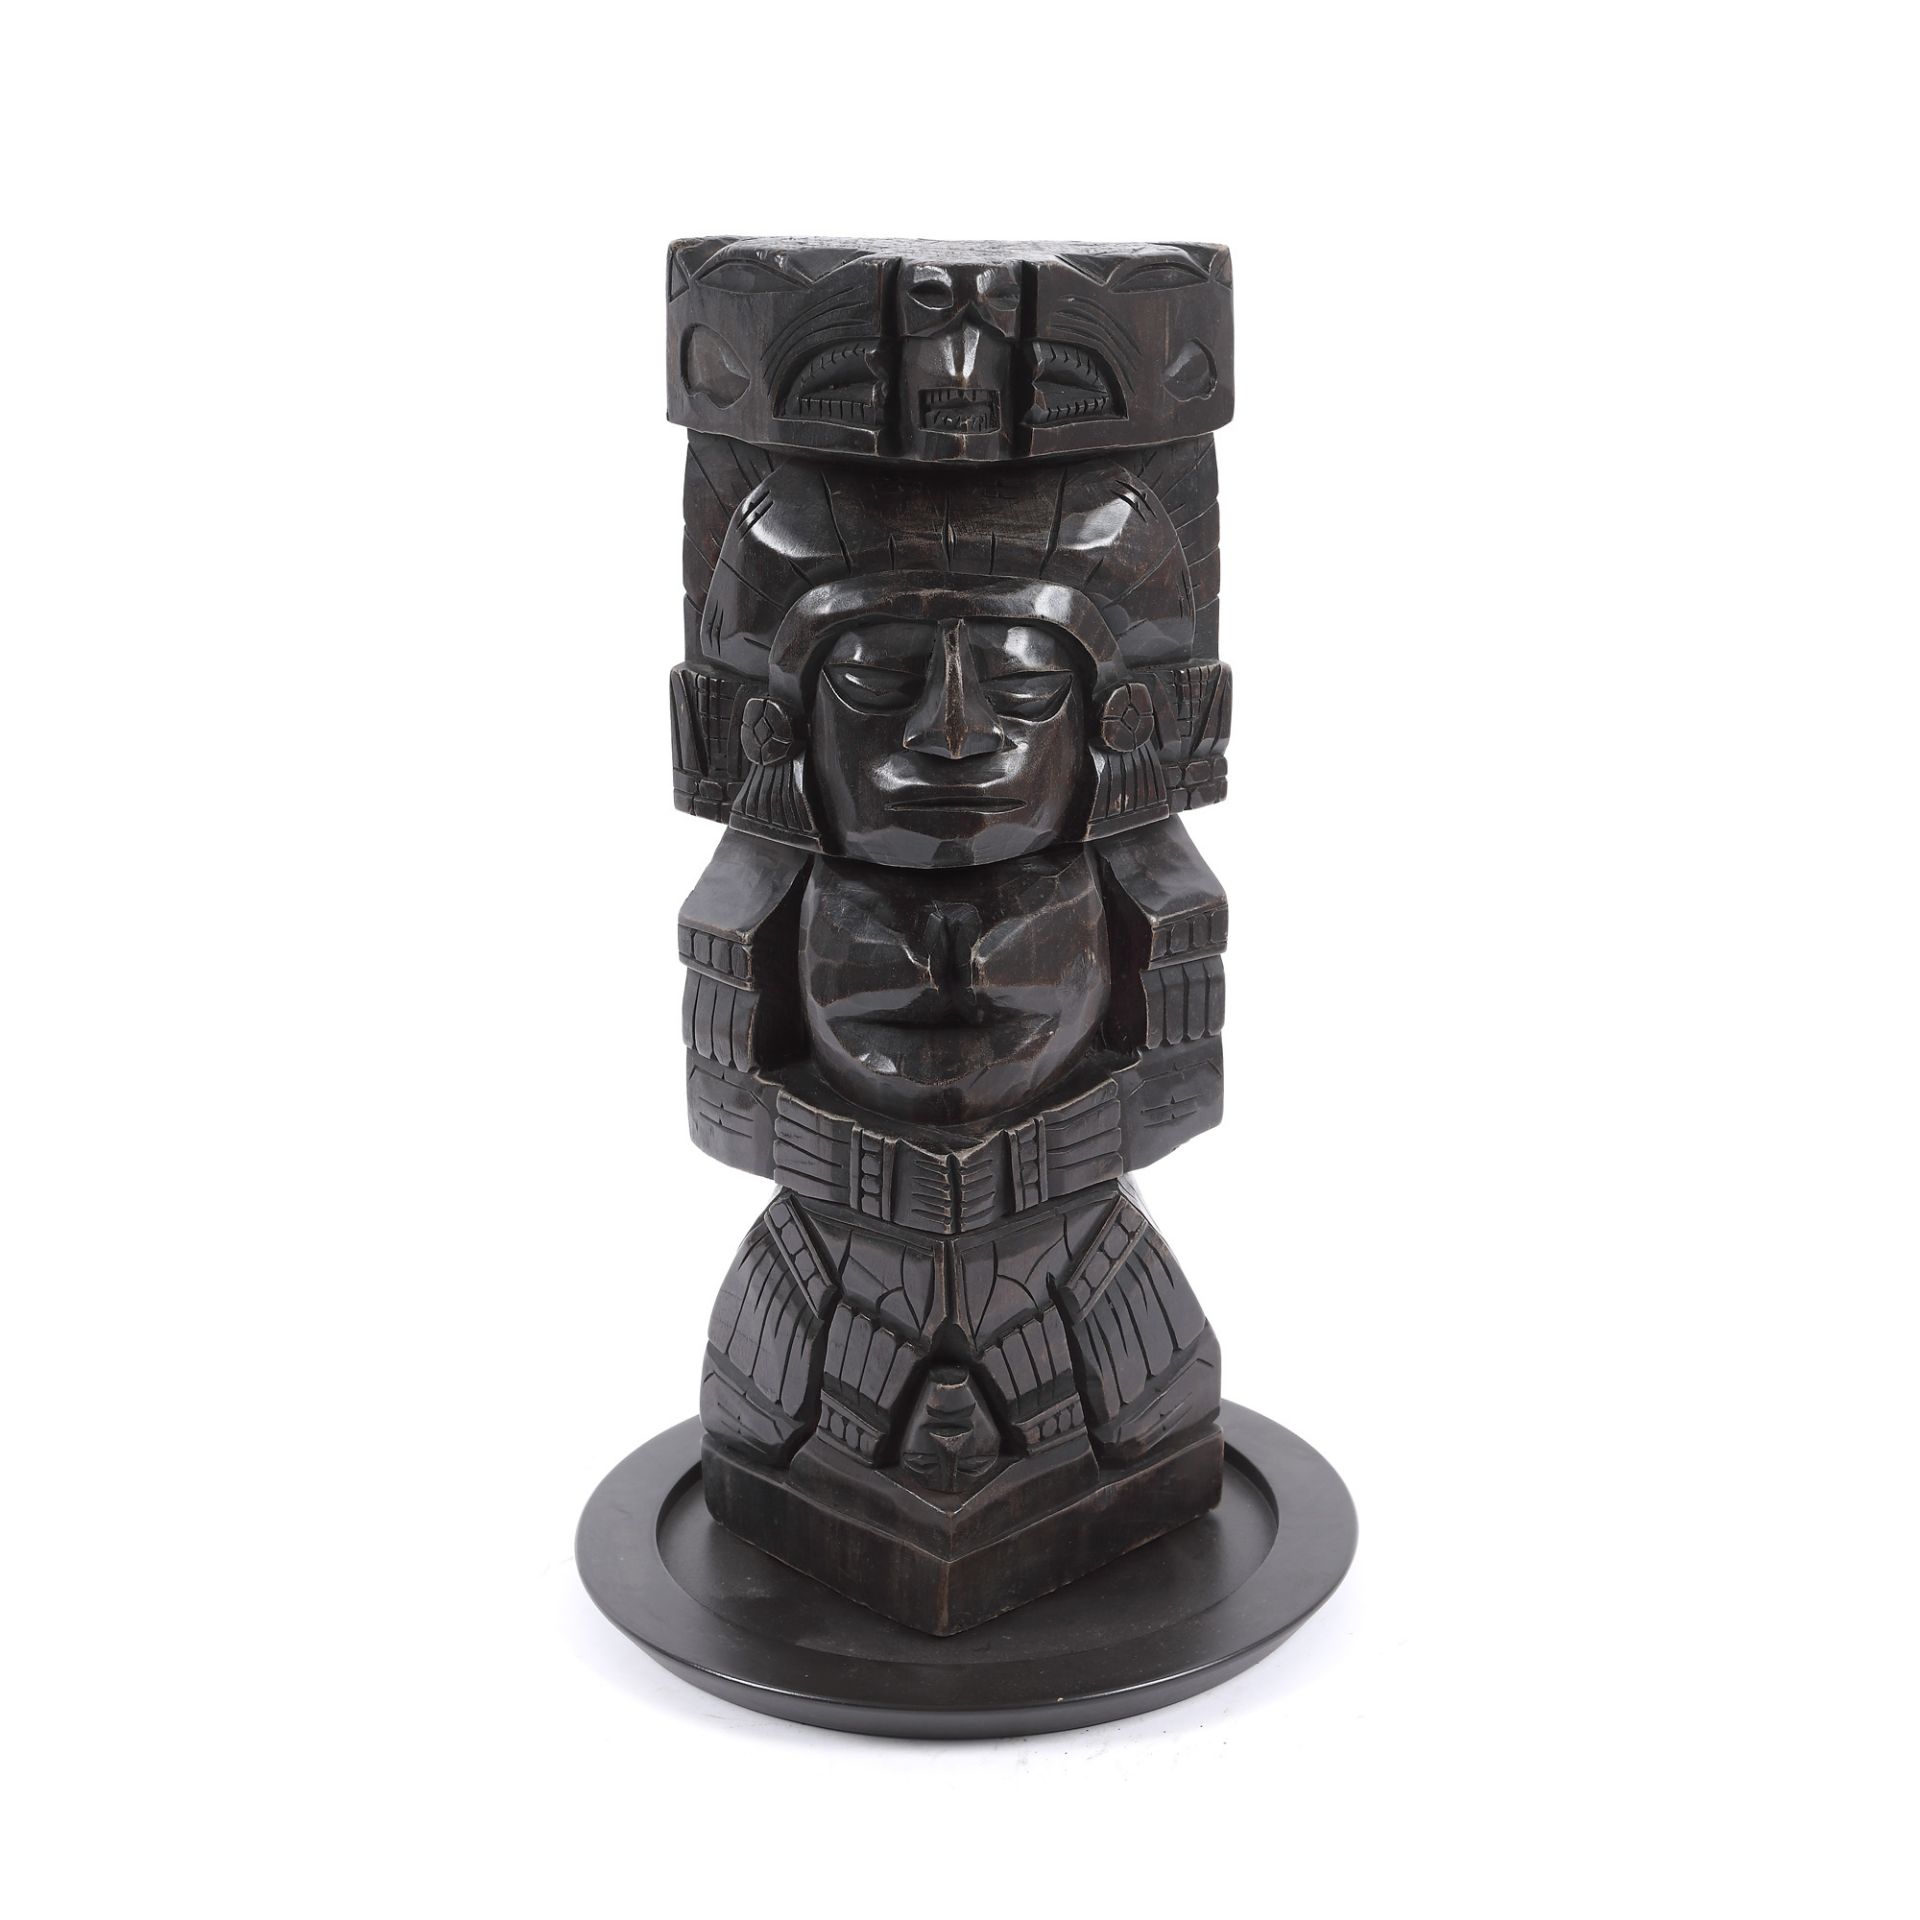 Totem made of exotic wood, together with a round base, Central America, mid-20th century